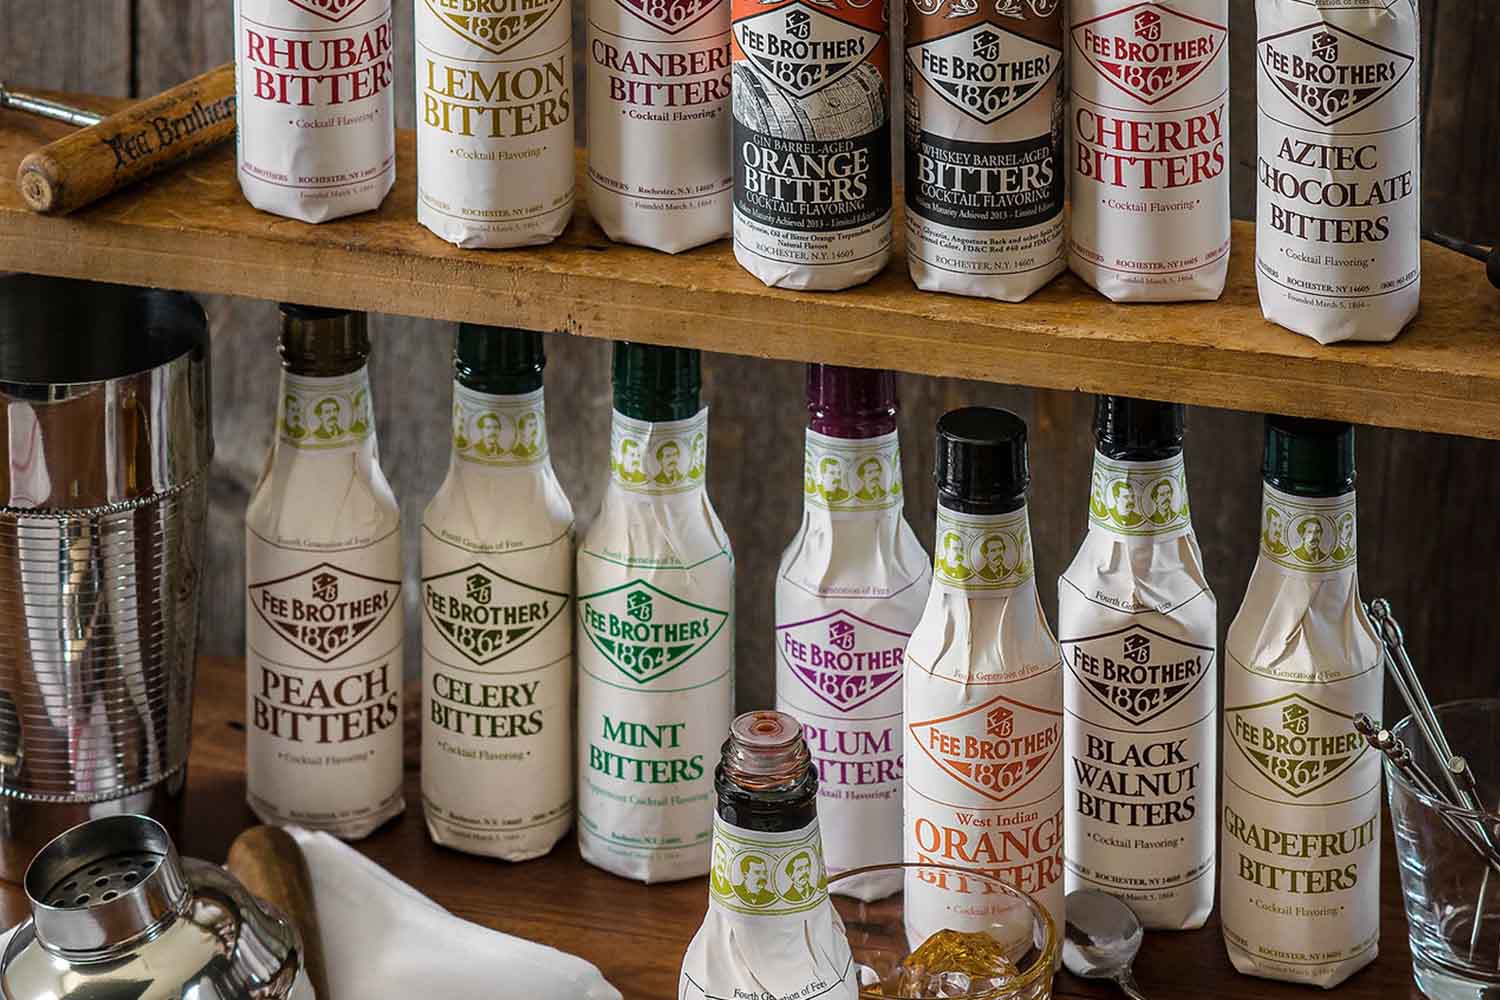 A line of bitters from Fee Brothers